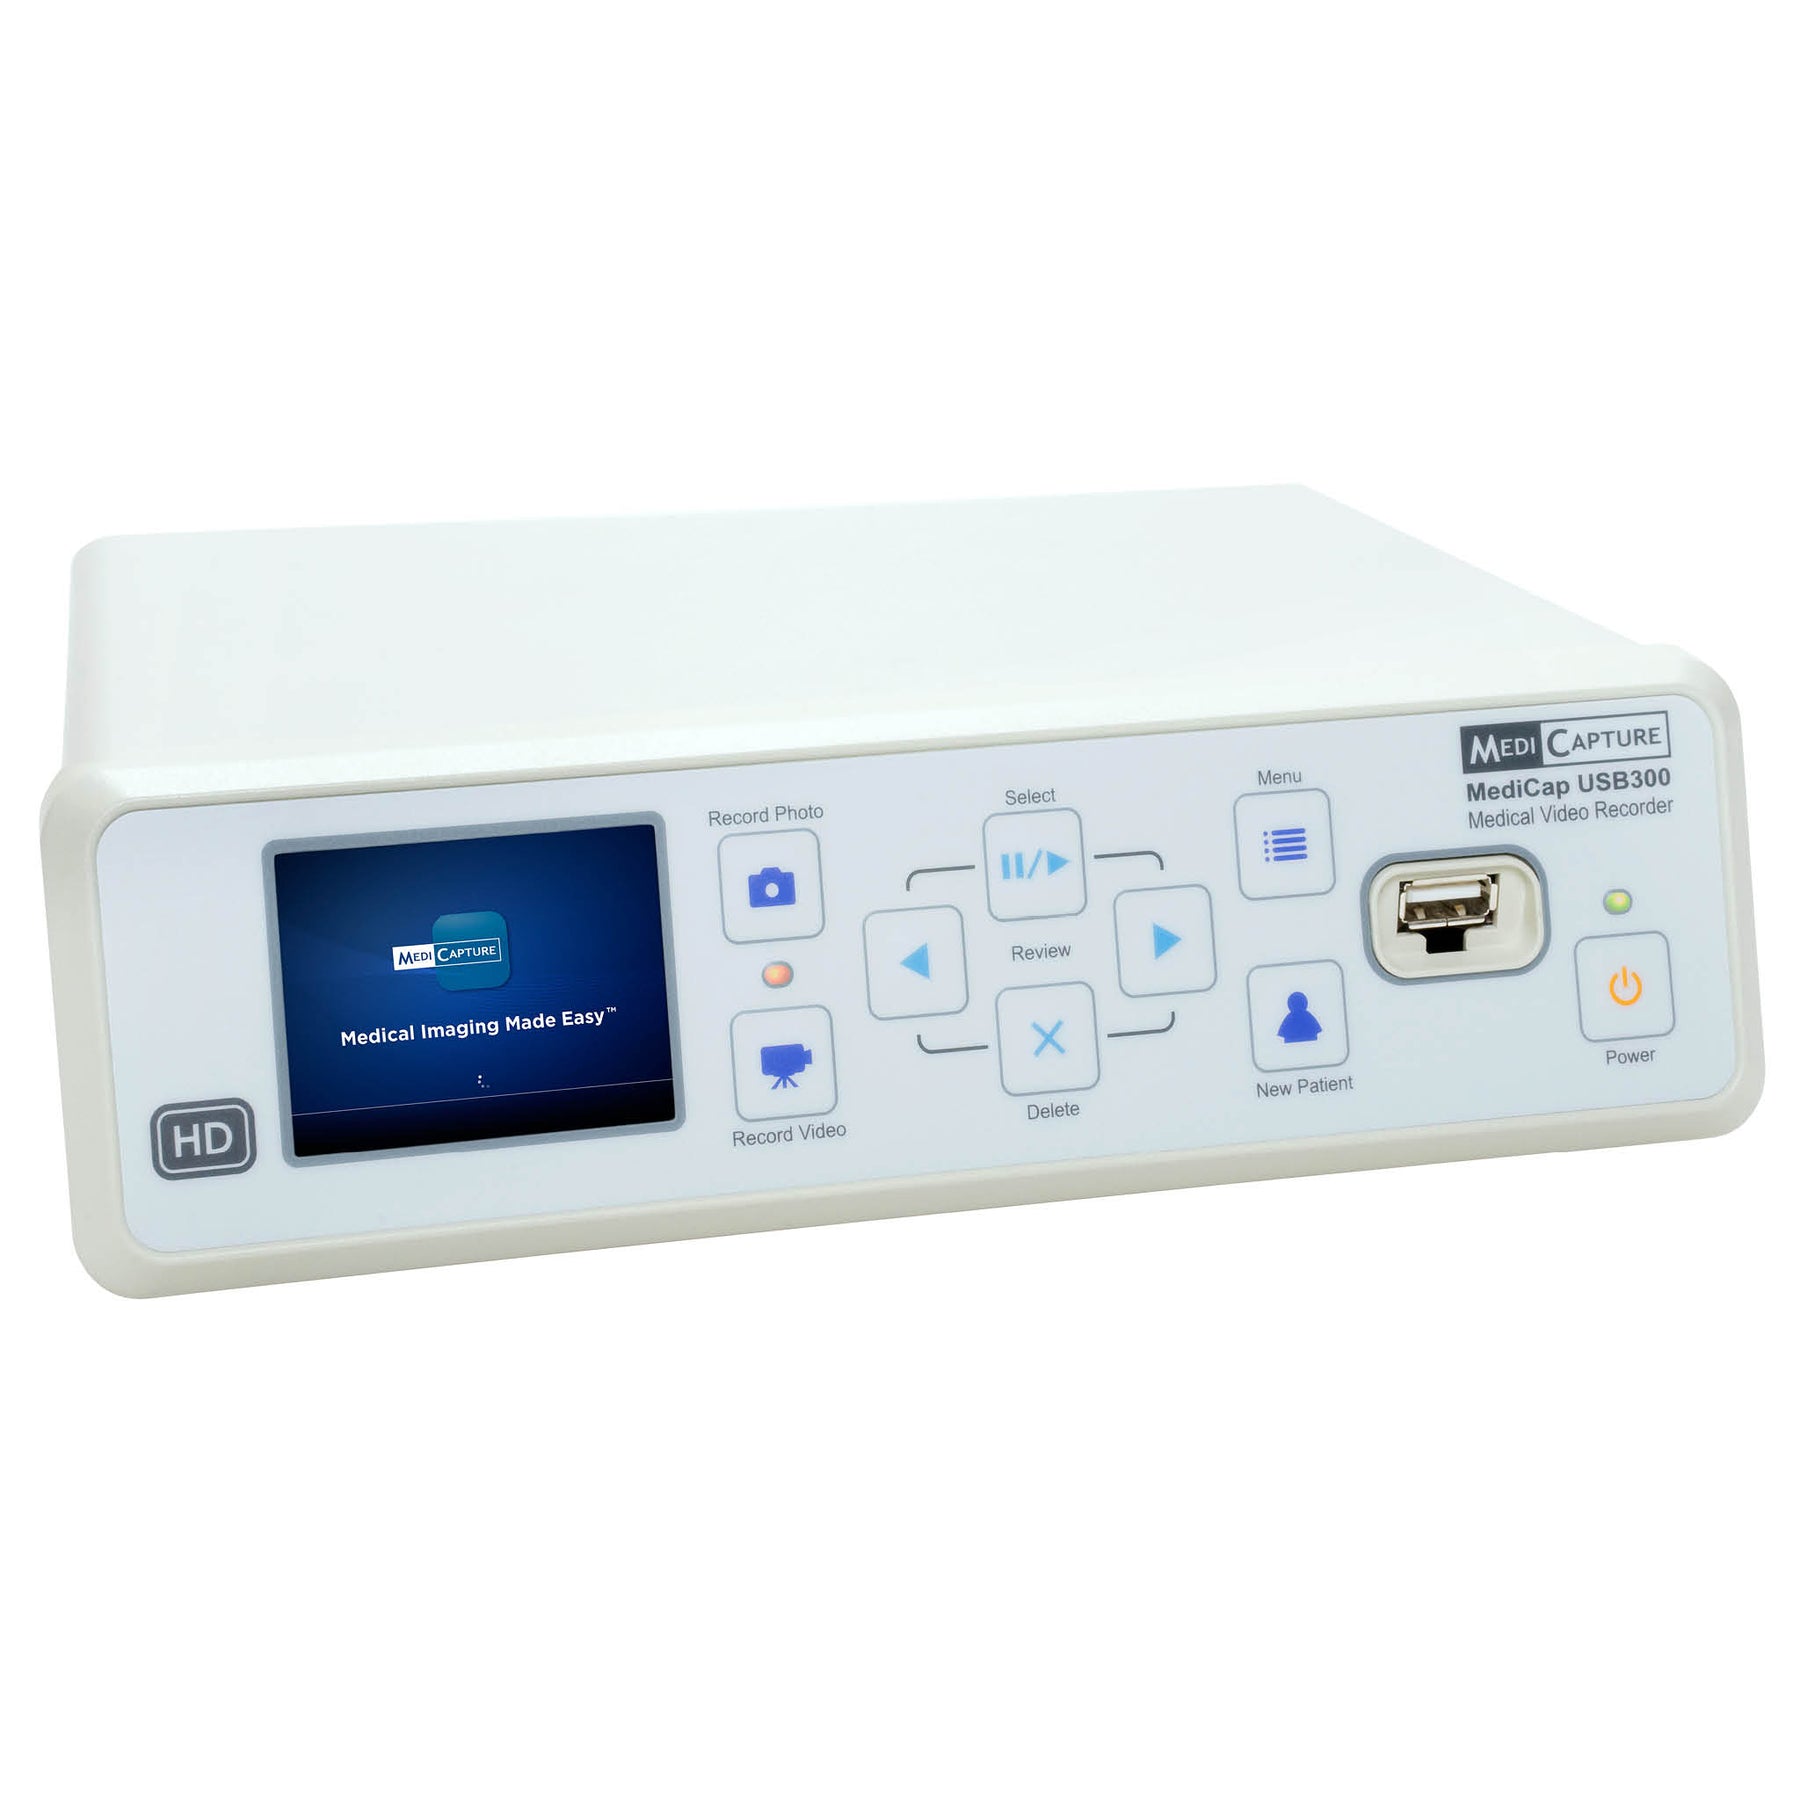 Medicapture MVR Lite 4K is a premium quality, easy-to-use, 4K Ultra HD medical video recorder